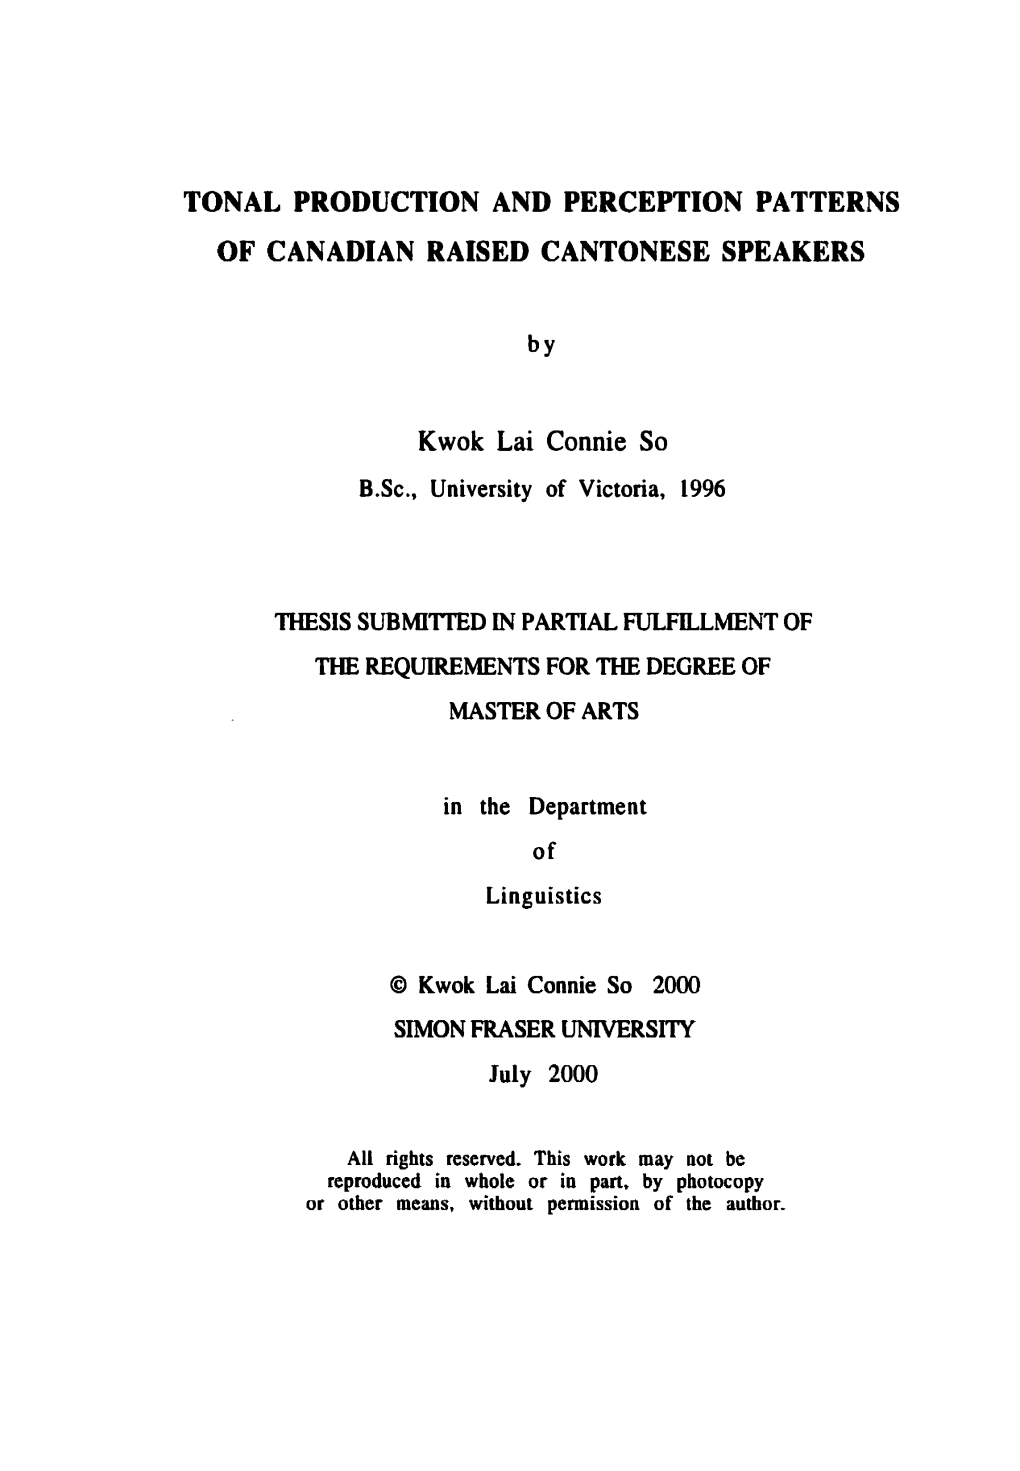 Tonal Production and Perception Patterns of Canadian Raised Cantonese Speakers